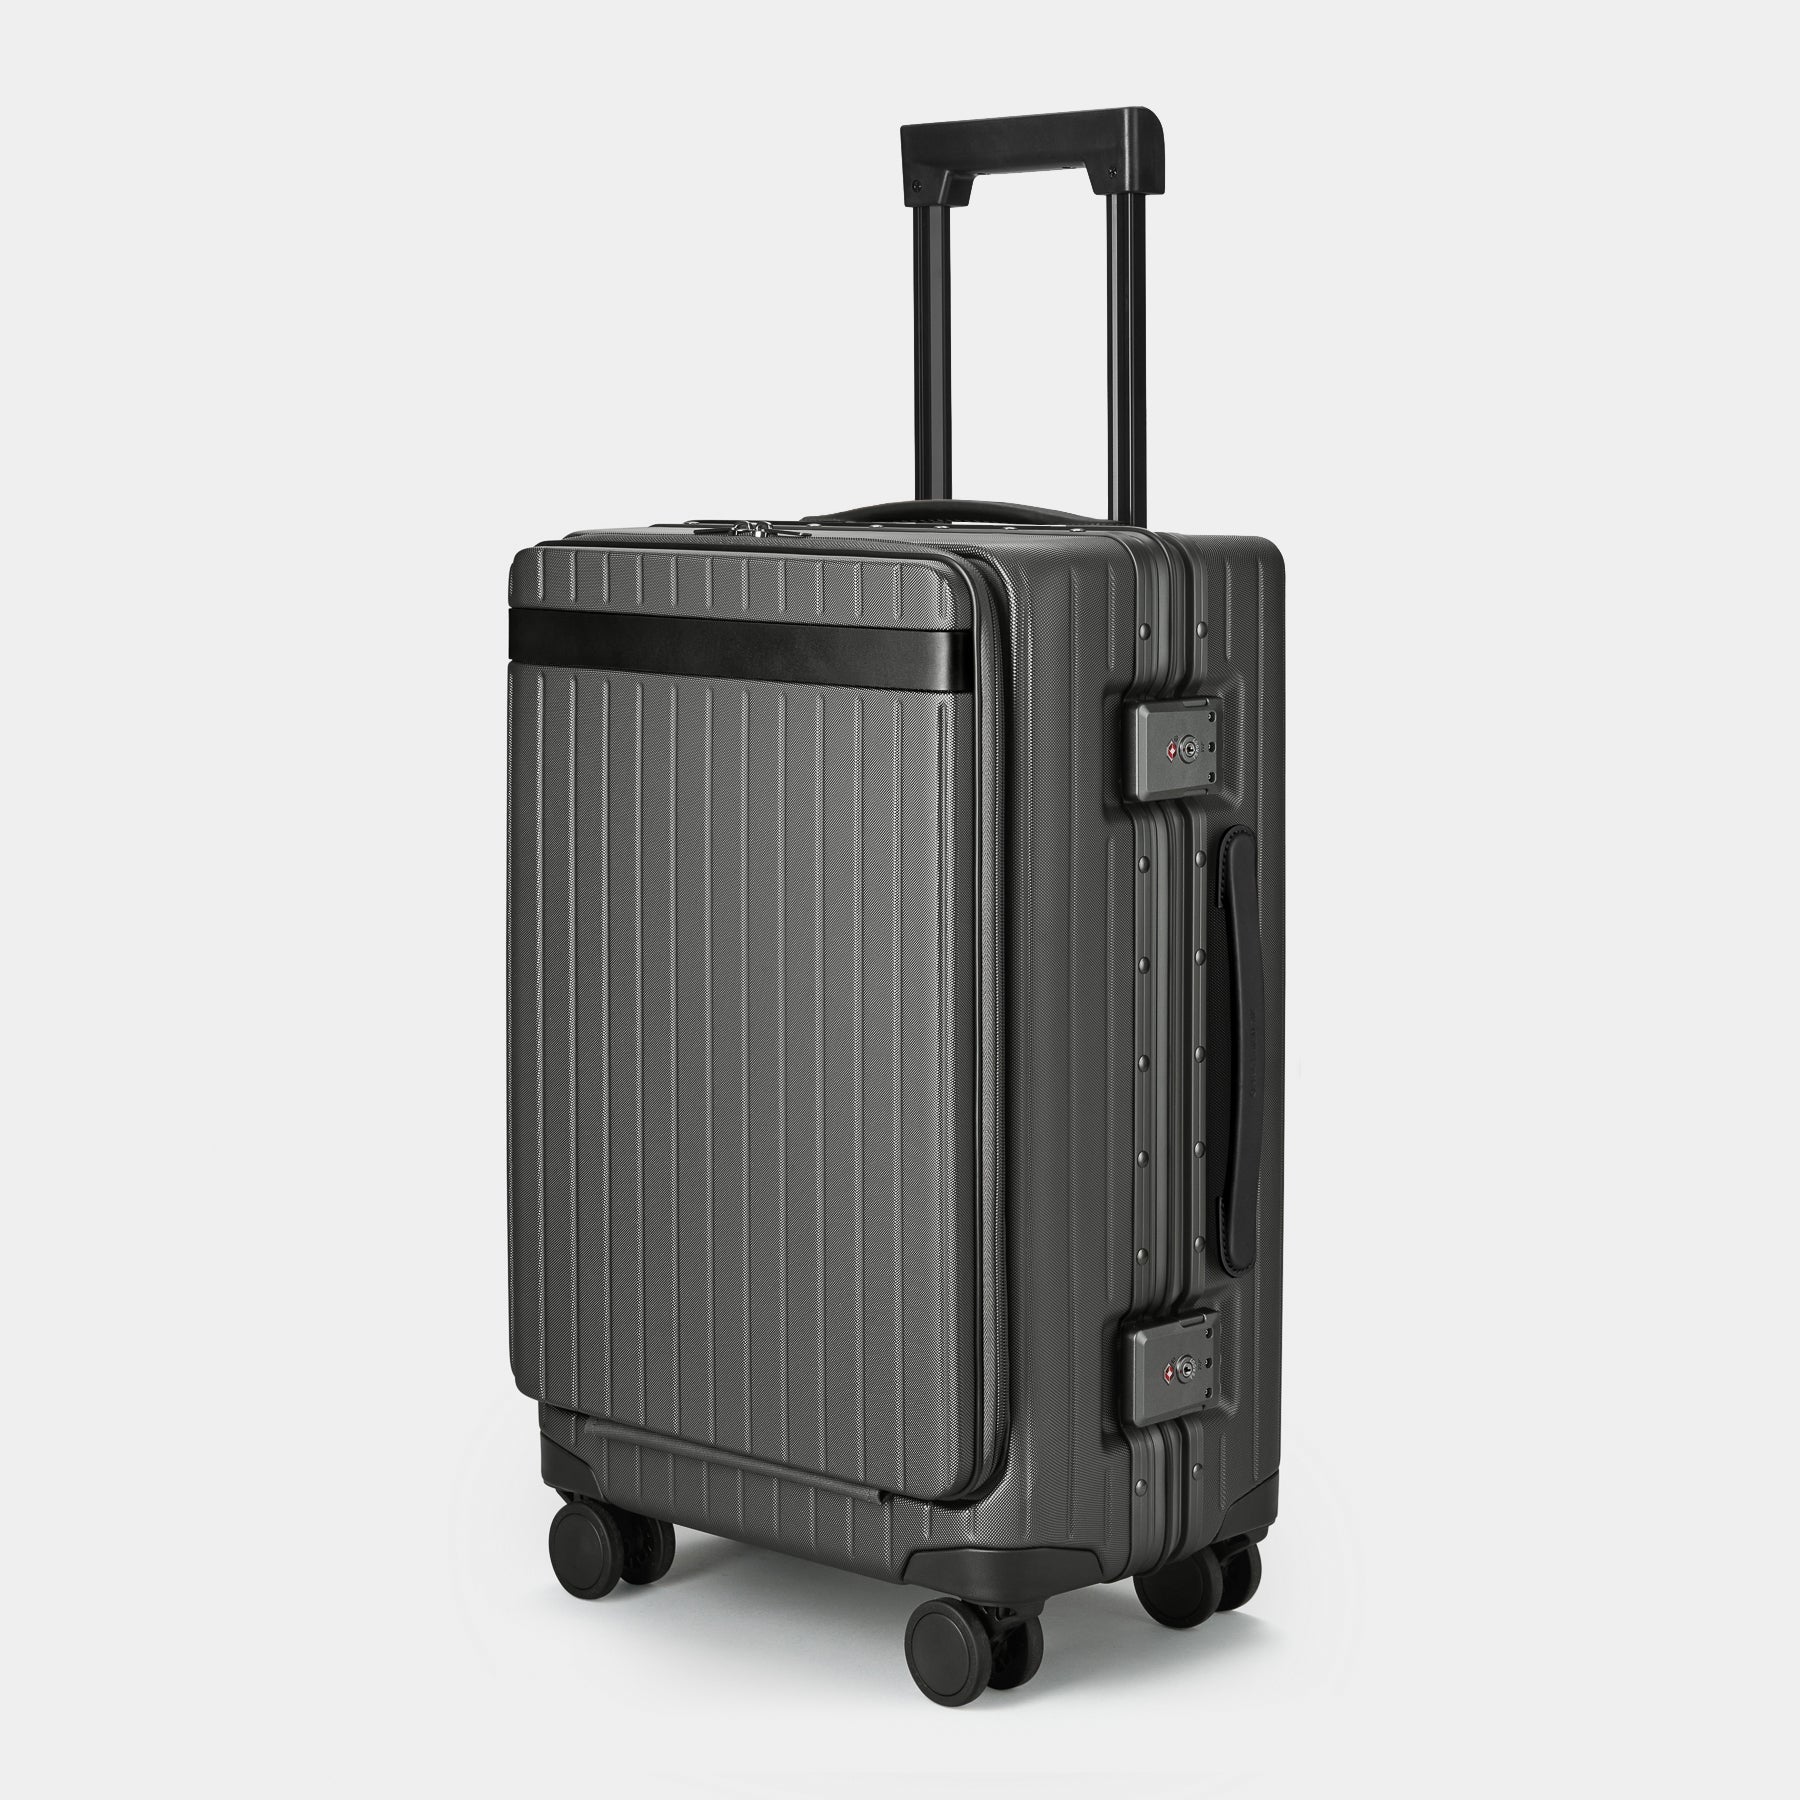 The Carry-on Pro - Return Black Polycarbonate carry-on suitcase - Excellent Condition